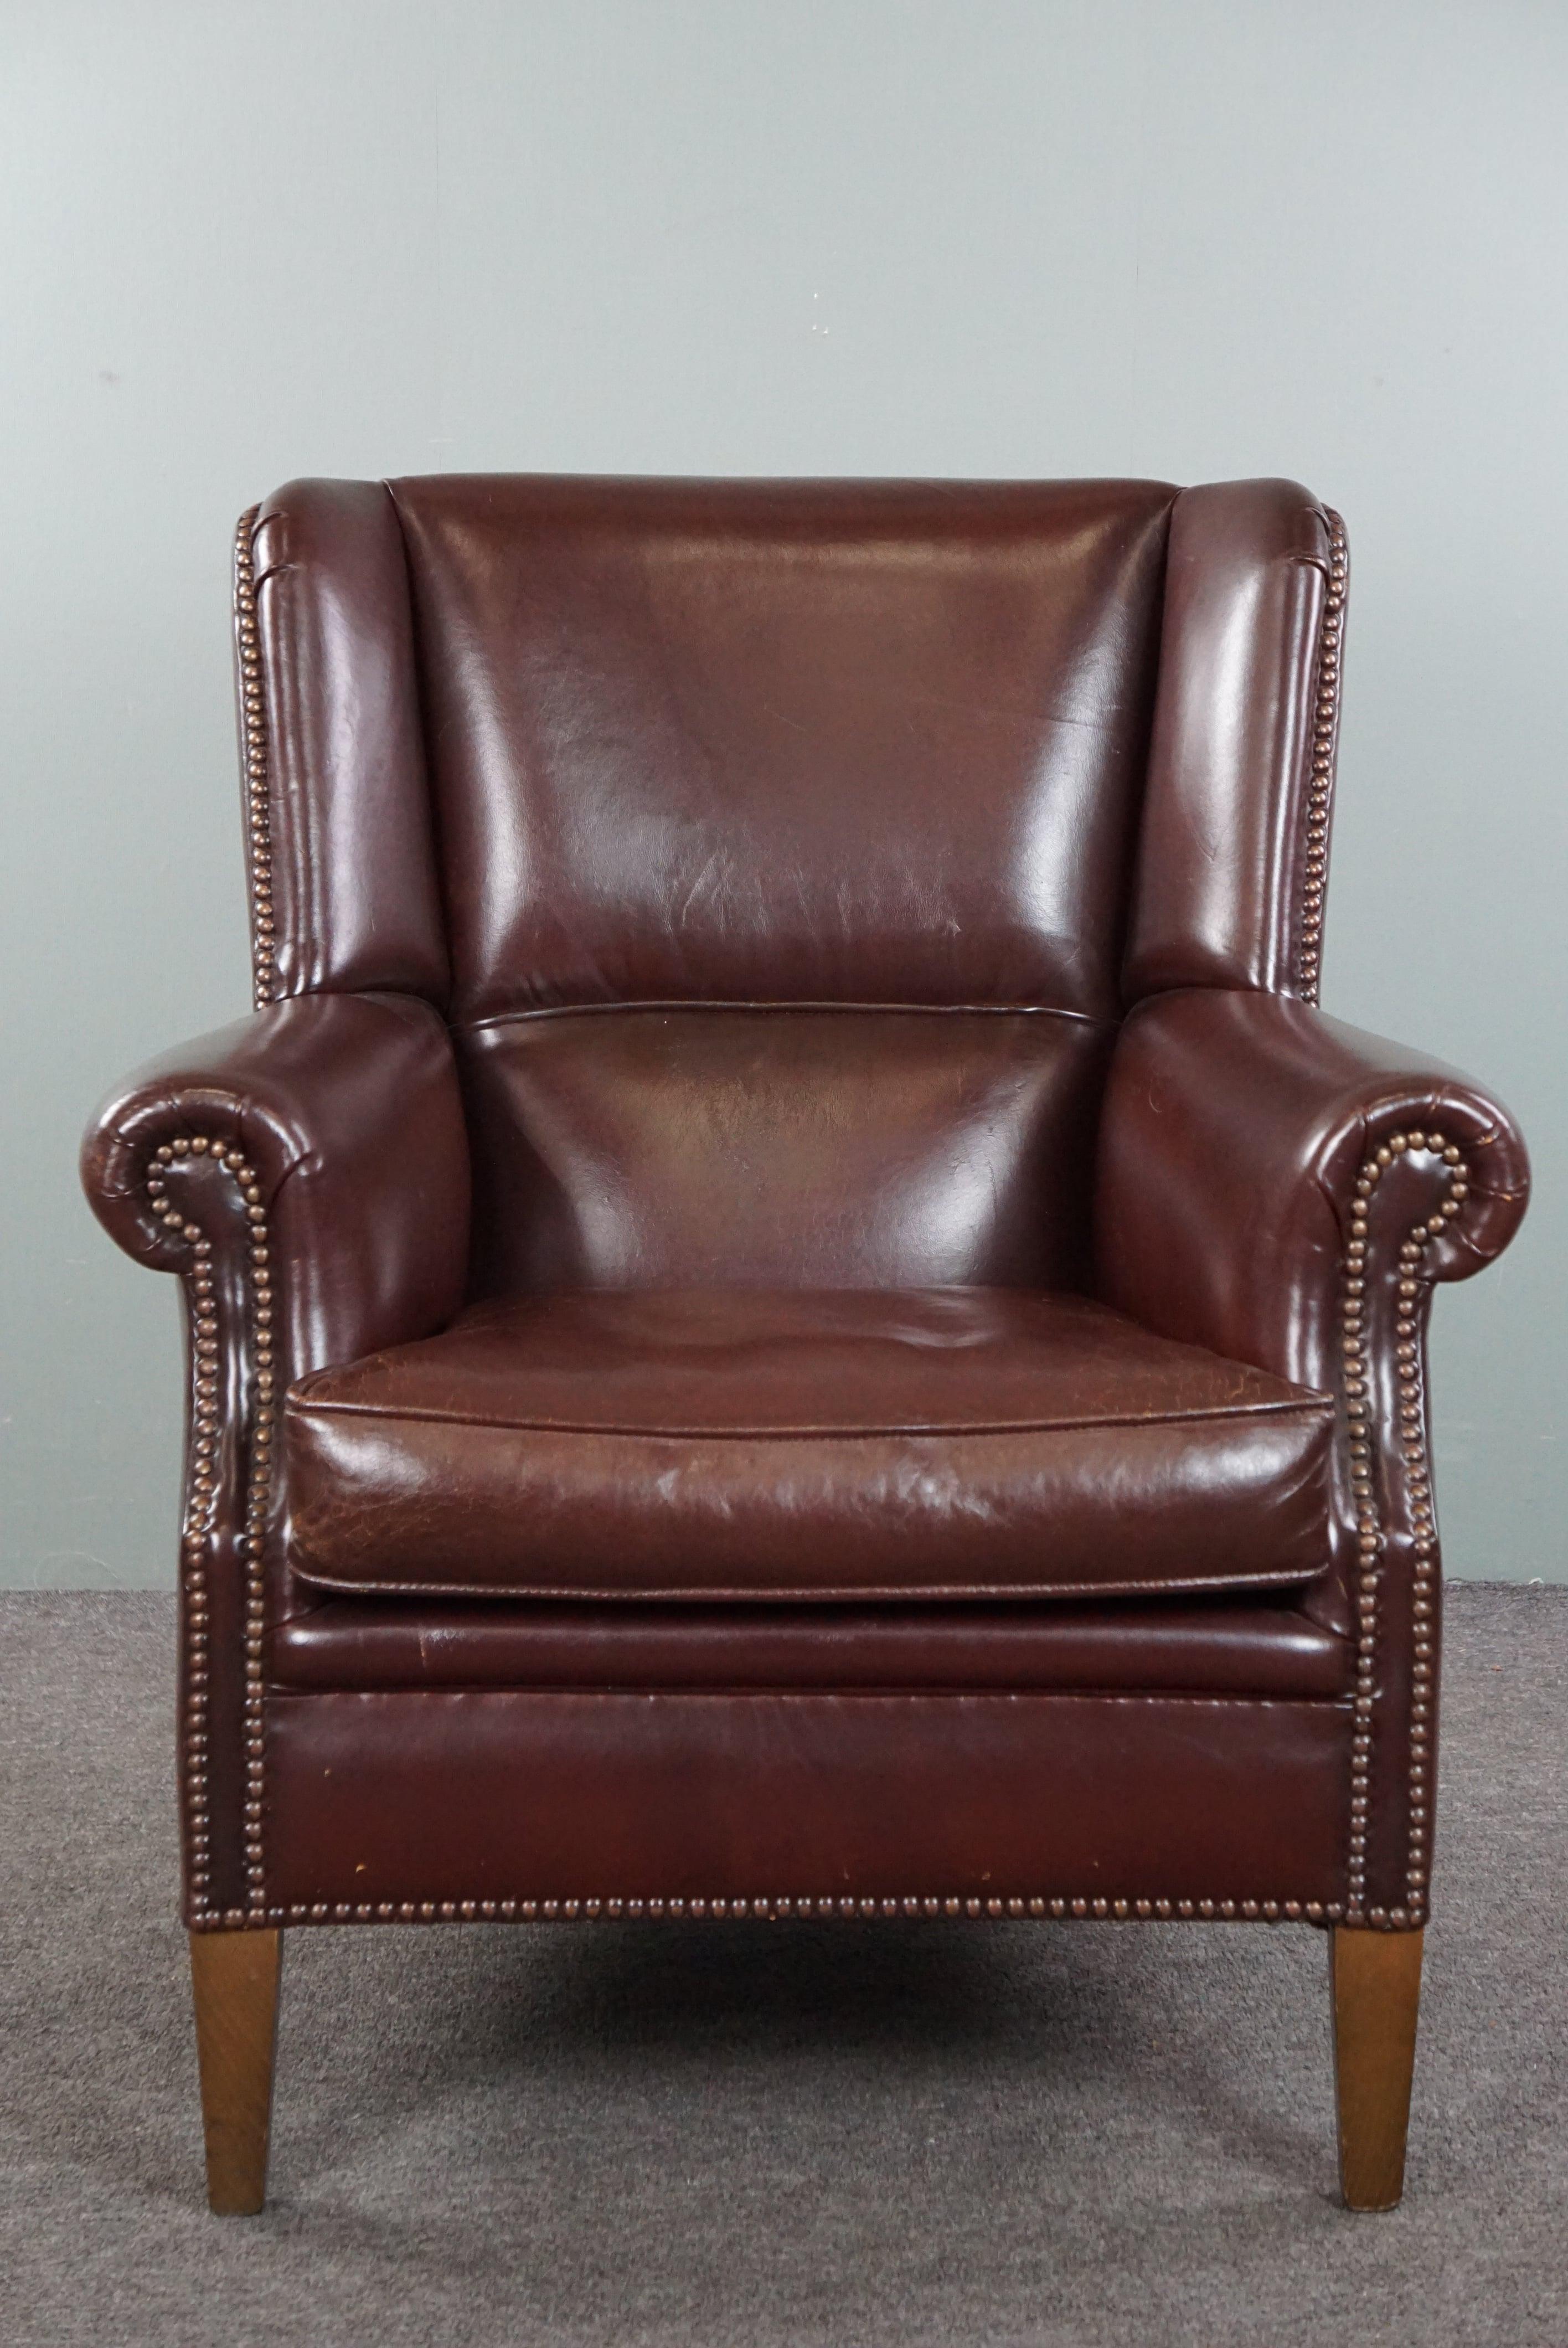 Offered is this comfortable sheep leather armchair finished in a lovely warm color adorned with nails. Attention to those who love a comfortable sheep leather armchair, this might be the one.

This proper armchair provides good comfort and a solid